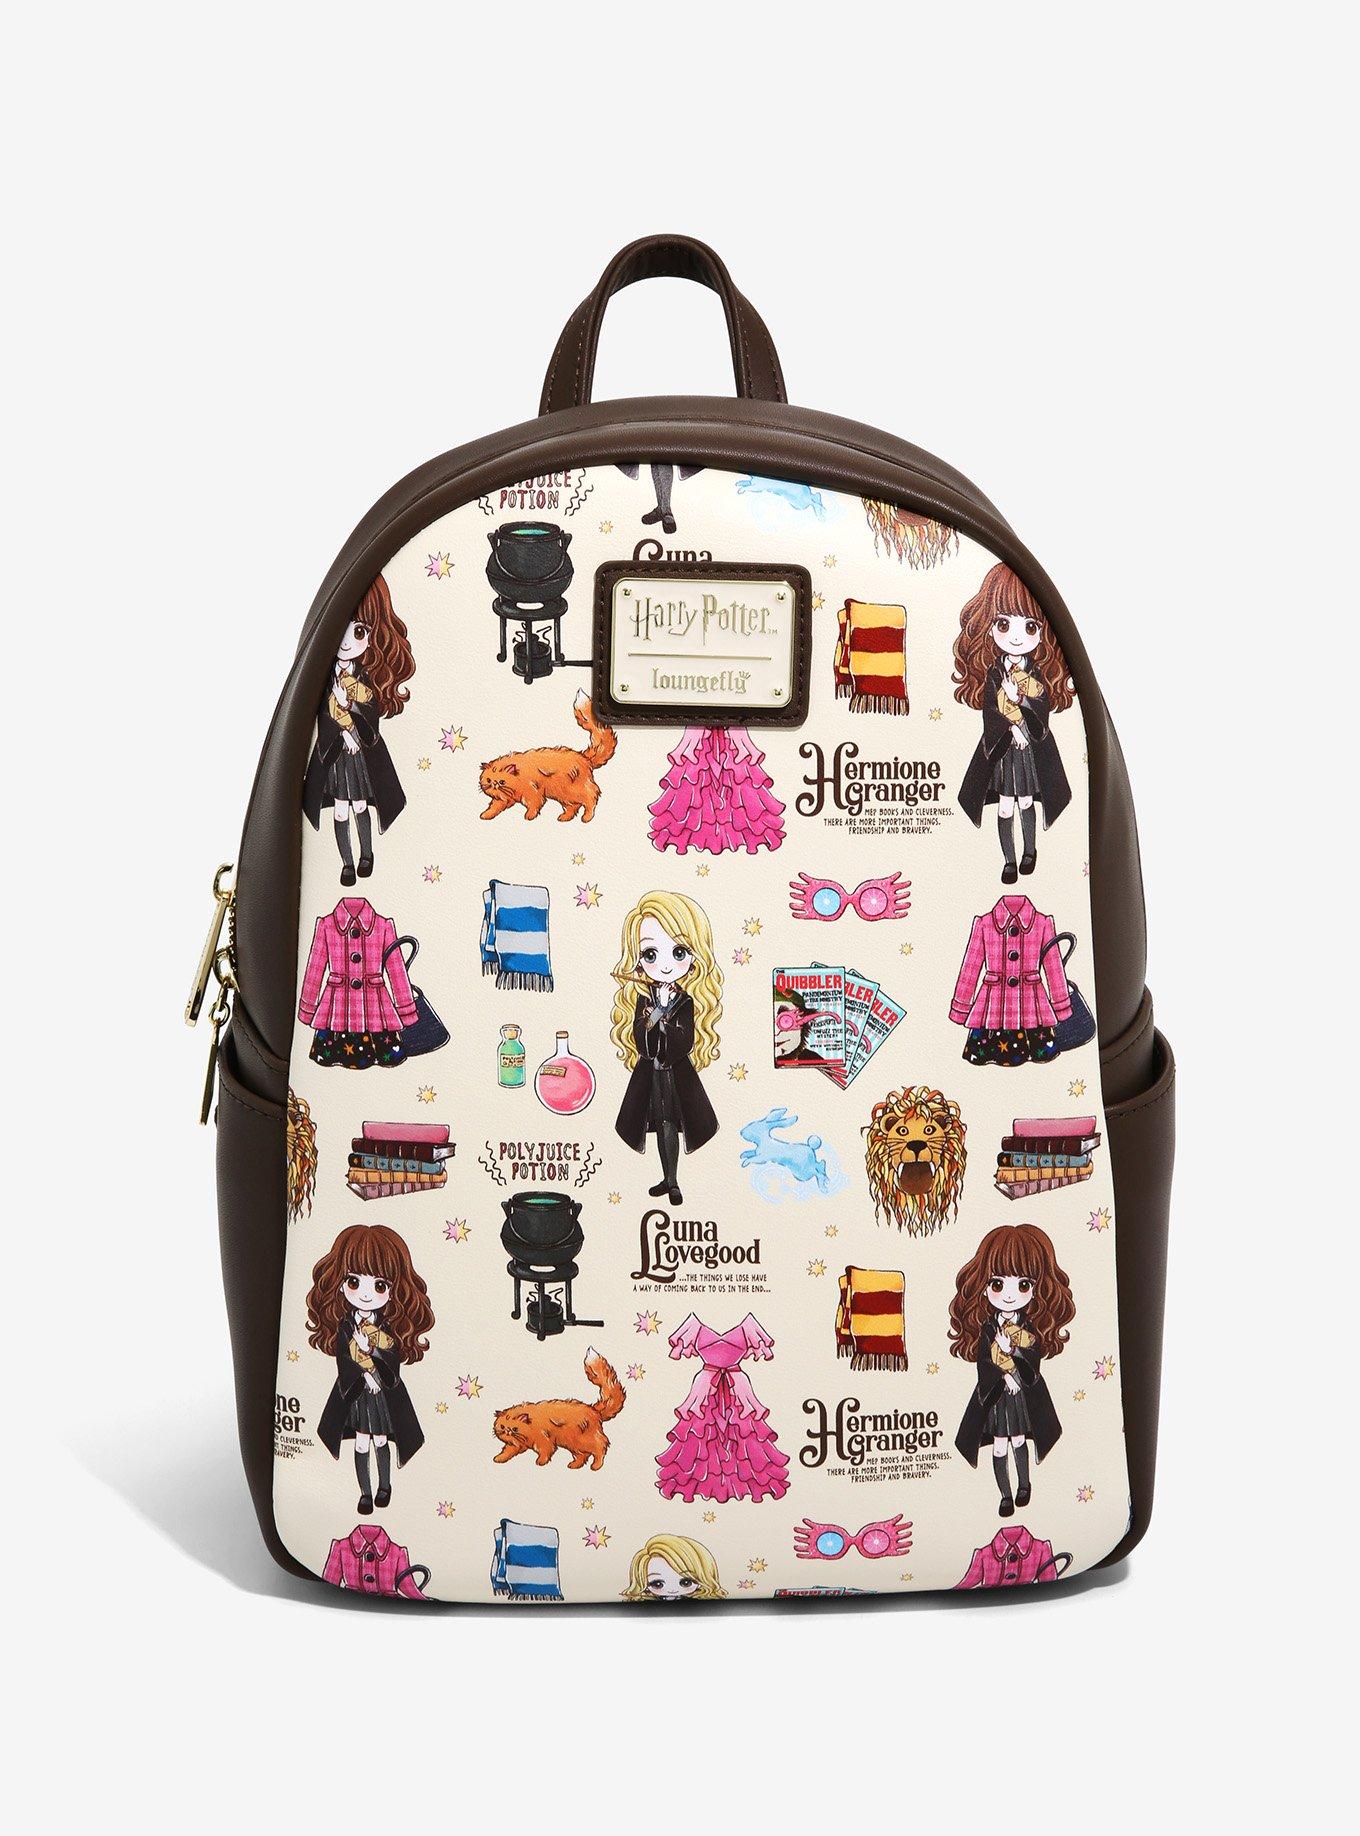 Loungefly - Just in at @HotTopic! These Harry Potter mini